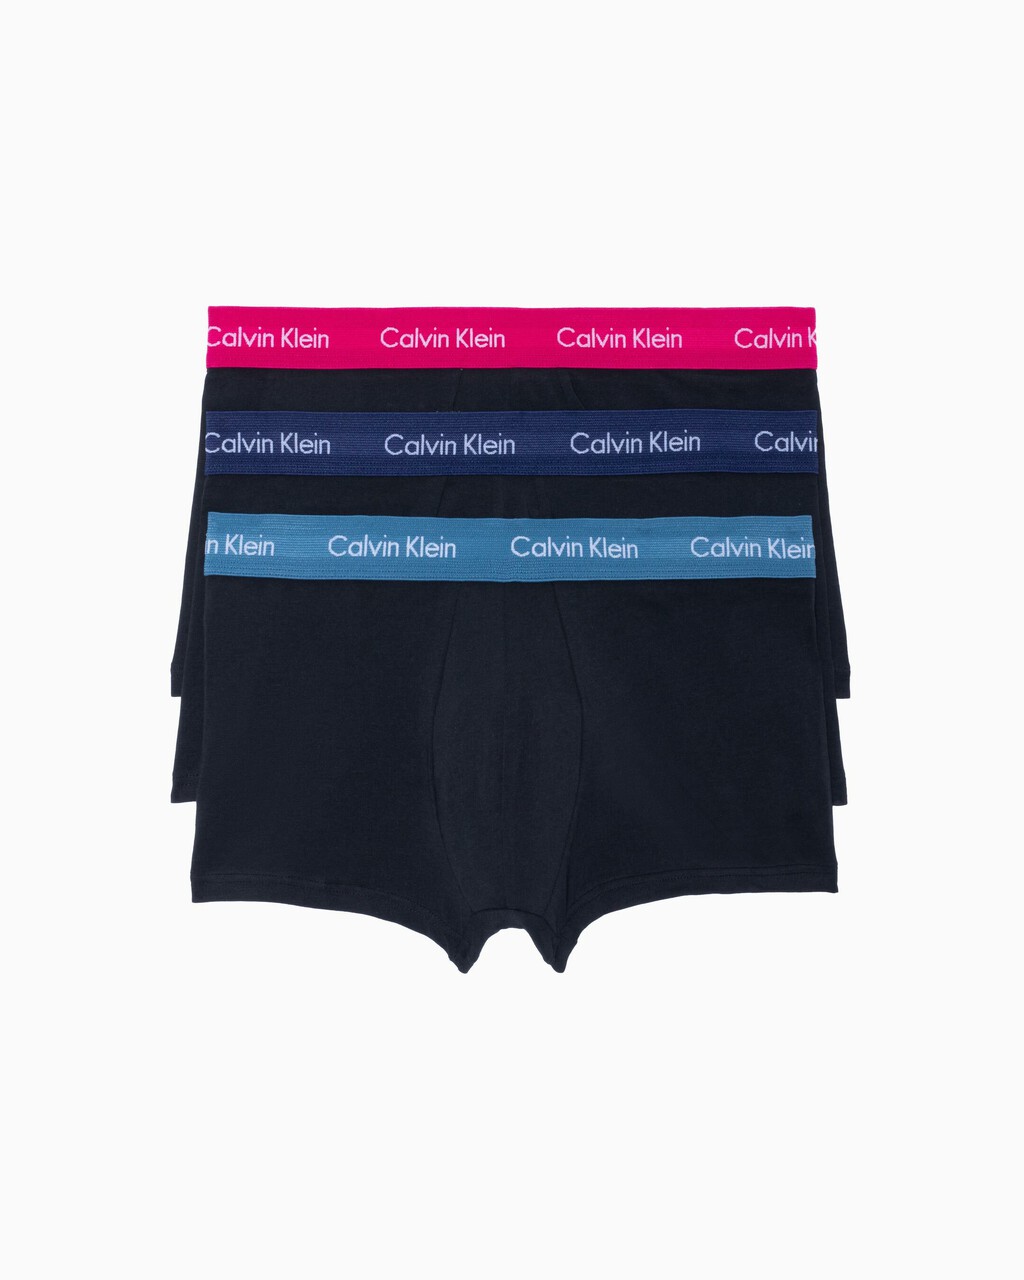 COTTON STRETCH 3 PACK LOW RISE TRUNK, Black Plumberry WB / Black Chino Blue WB, hi-res